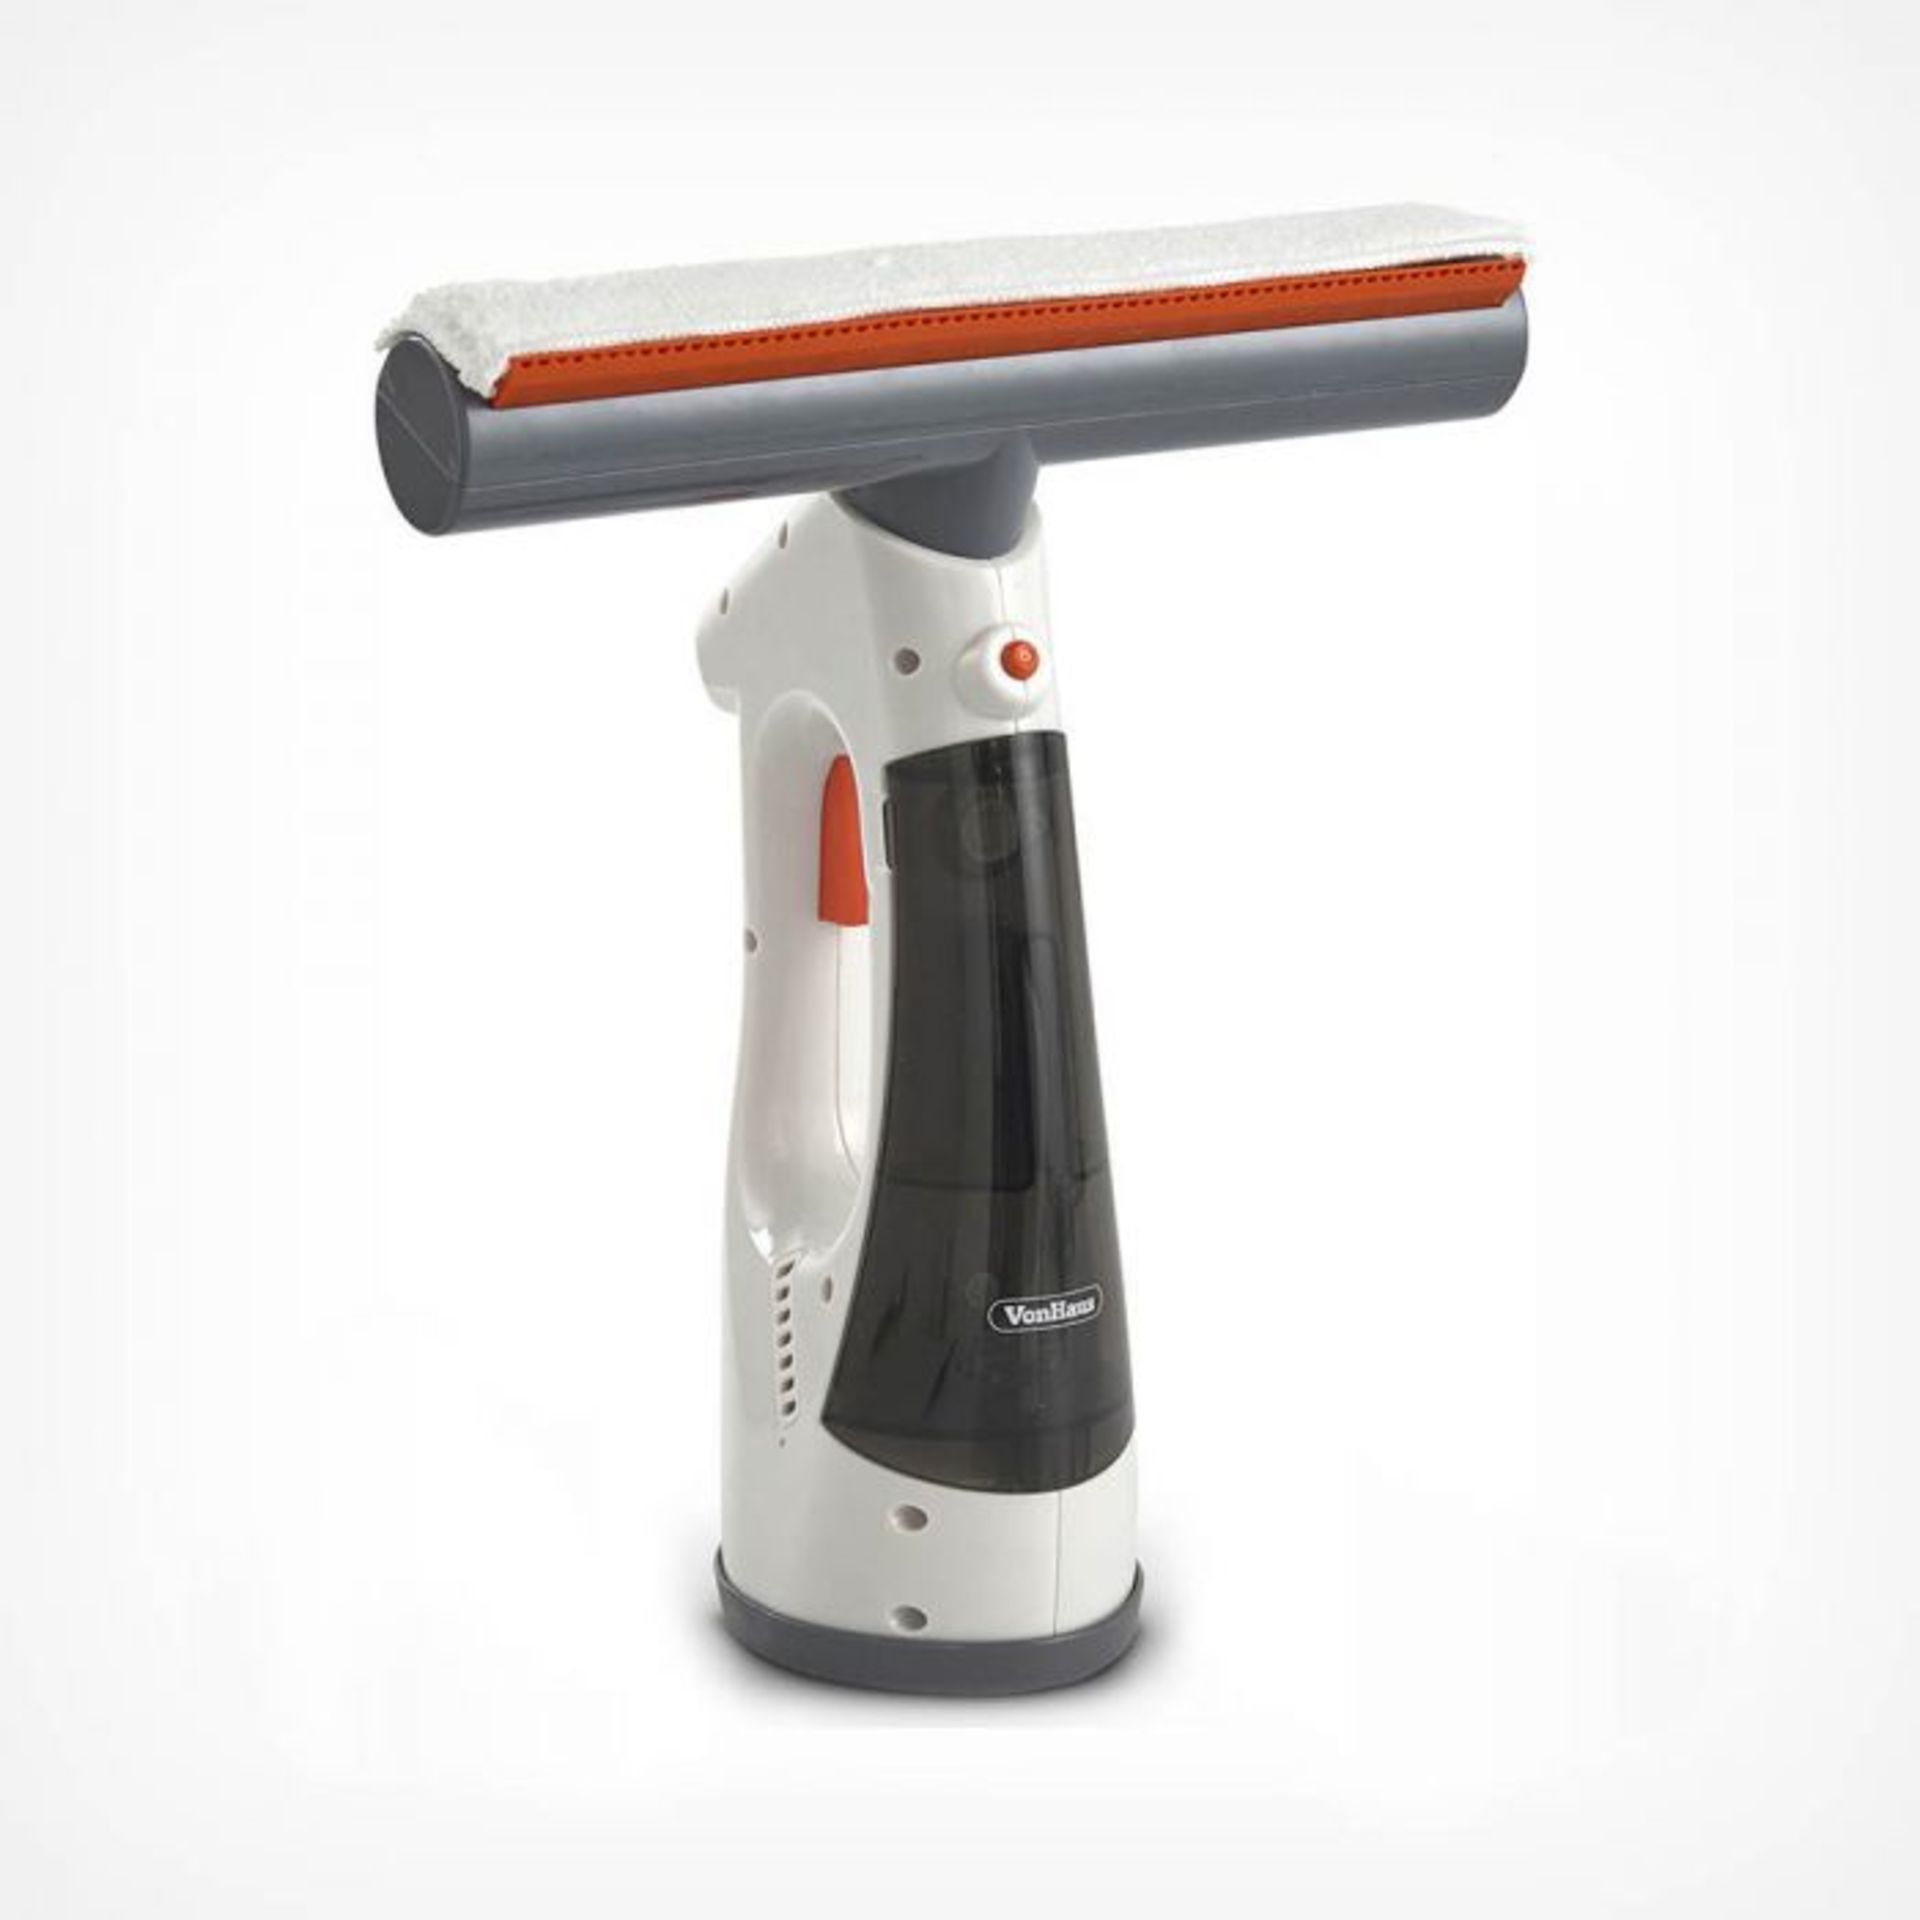 (S447) 3-in-1 Window Vacuum Powered by a 3.7V battery for cordless flexibility Charge time: 2... - Image 2 of 4